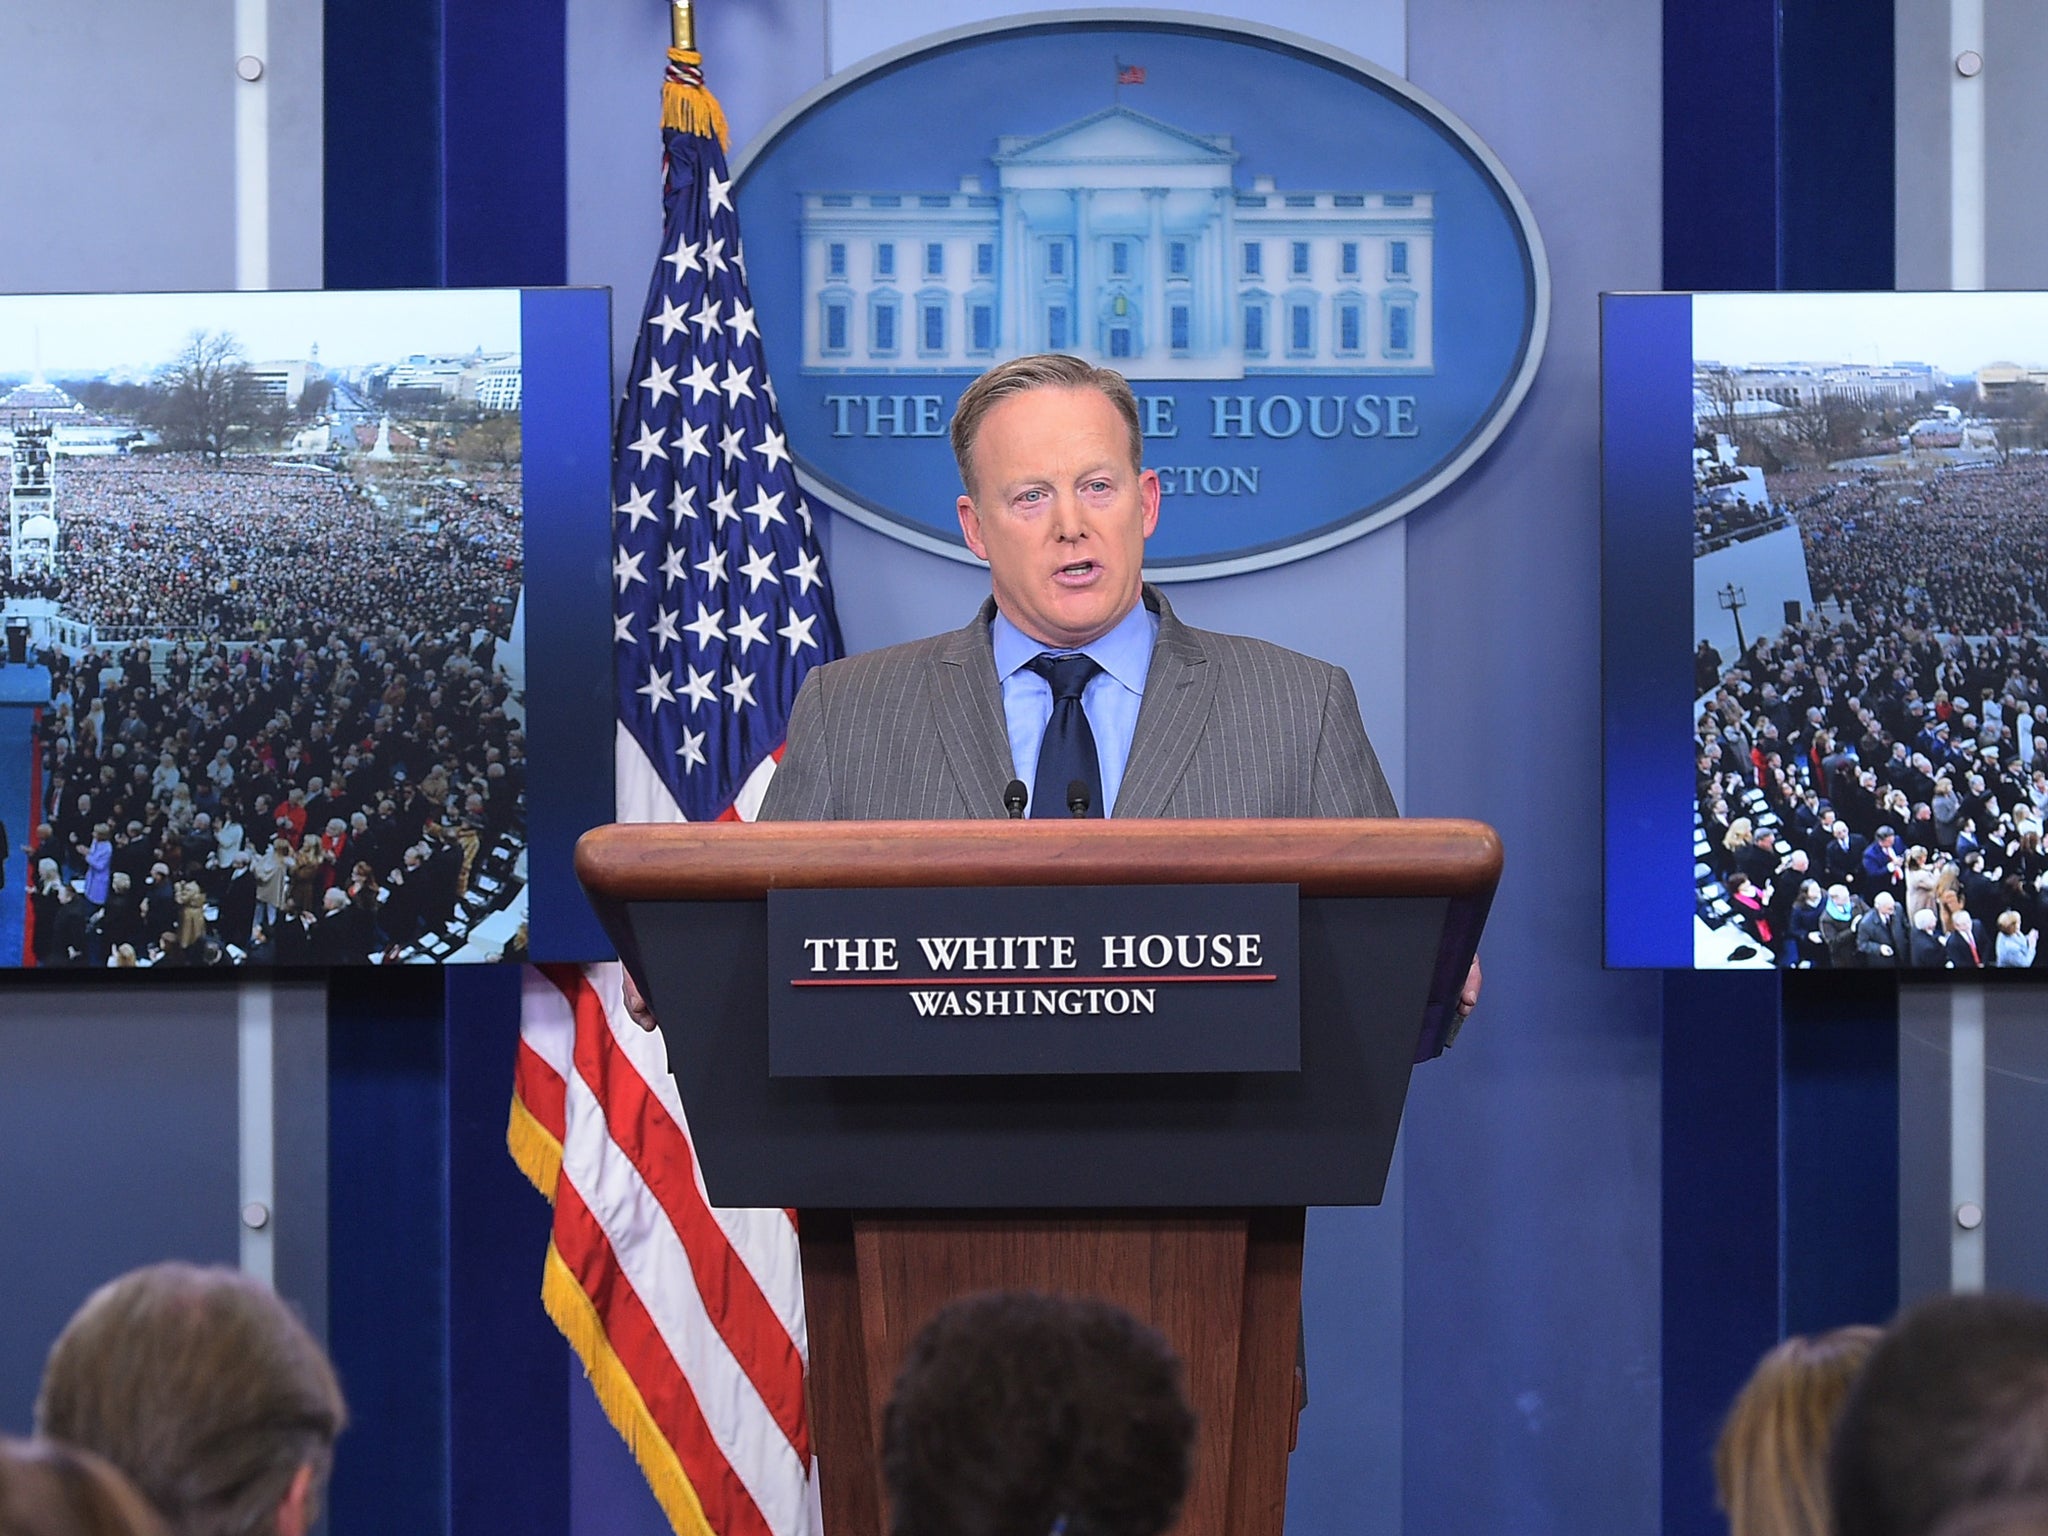 Spicer berated the press in his first White House briefing